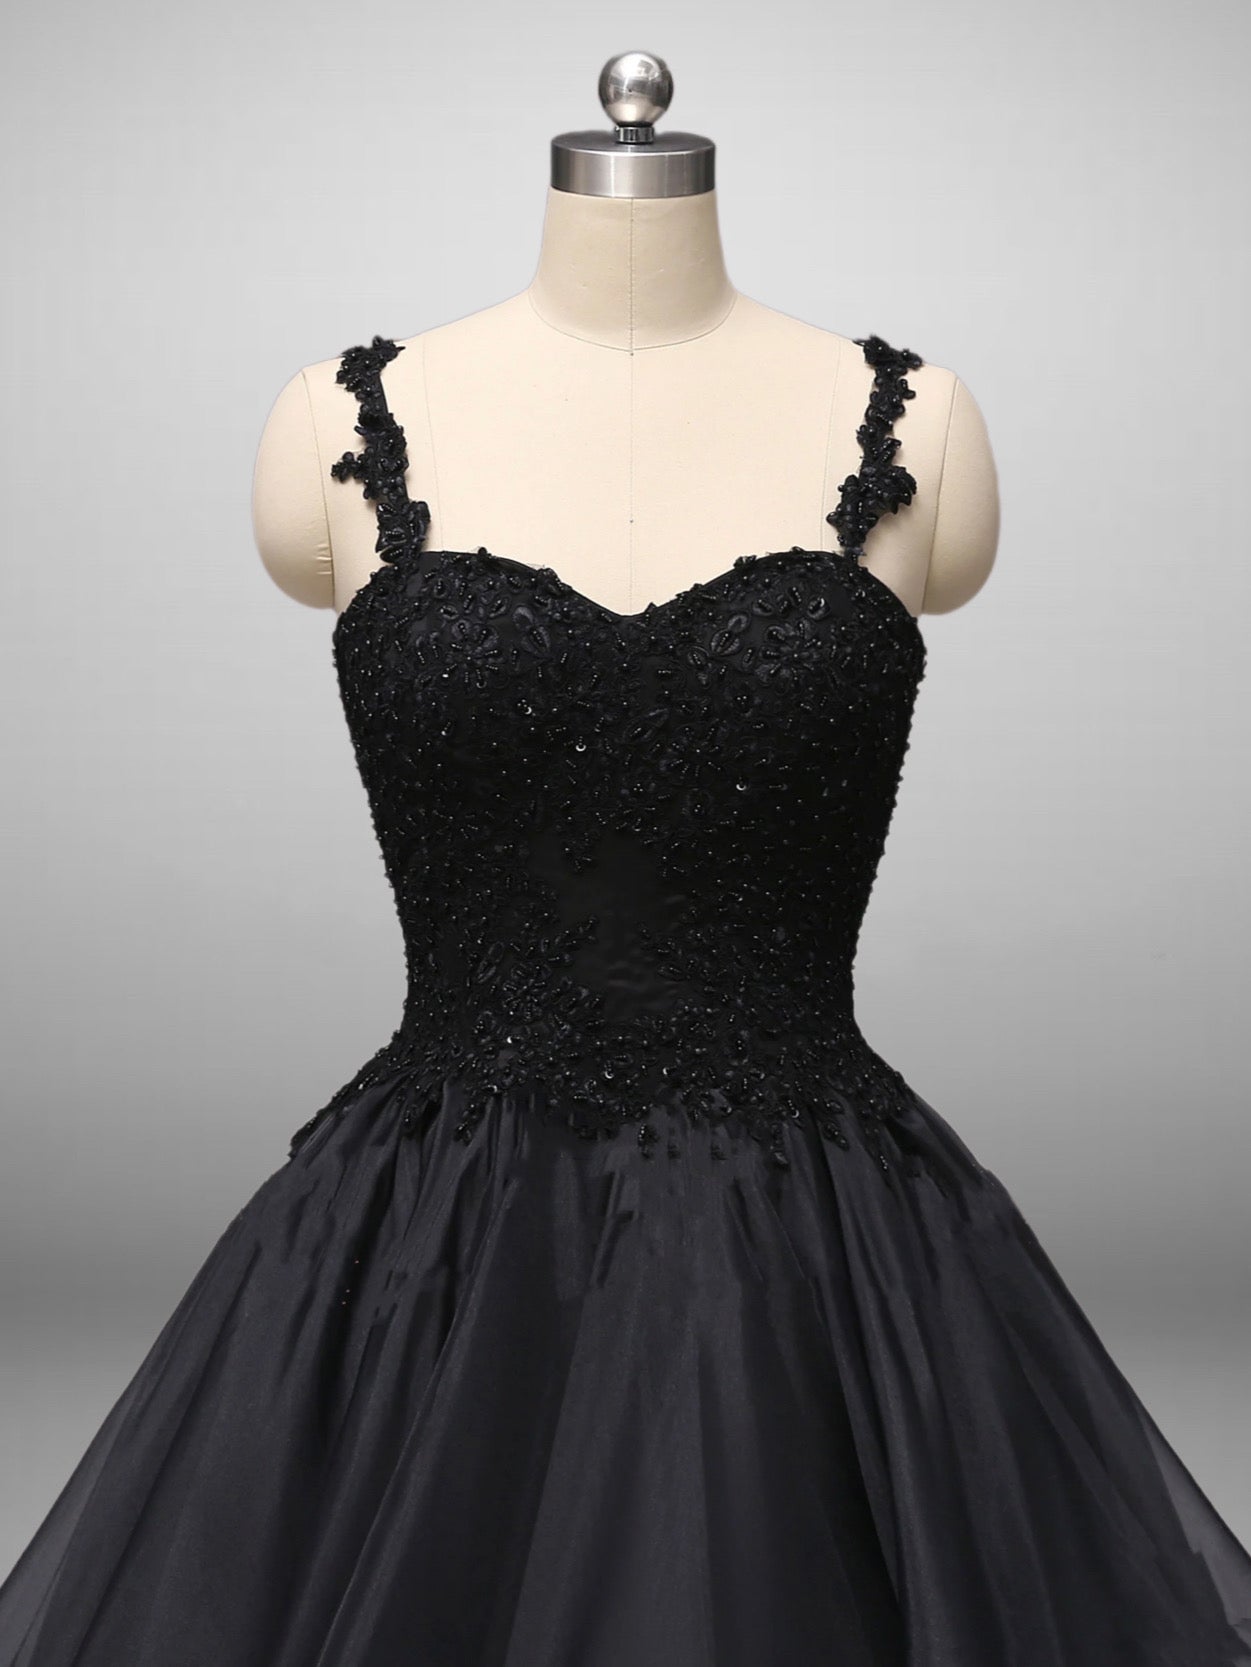 Classic Gothic Black Lace Embroidered A-Line Formal Dress With Ruffle Skirt Spaghetti Straps Plus Size - WonderlandByLilian